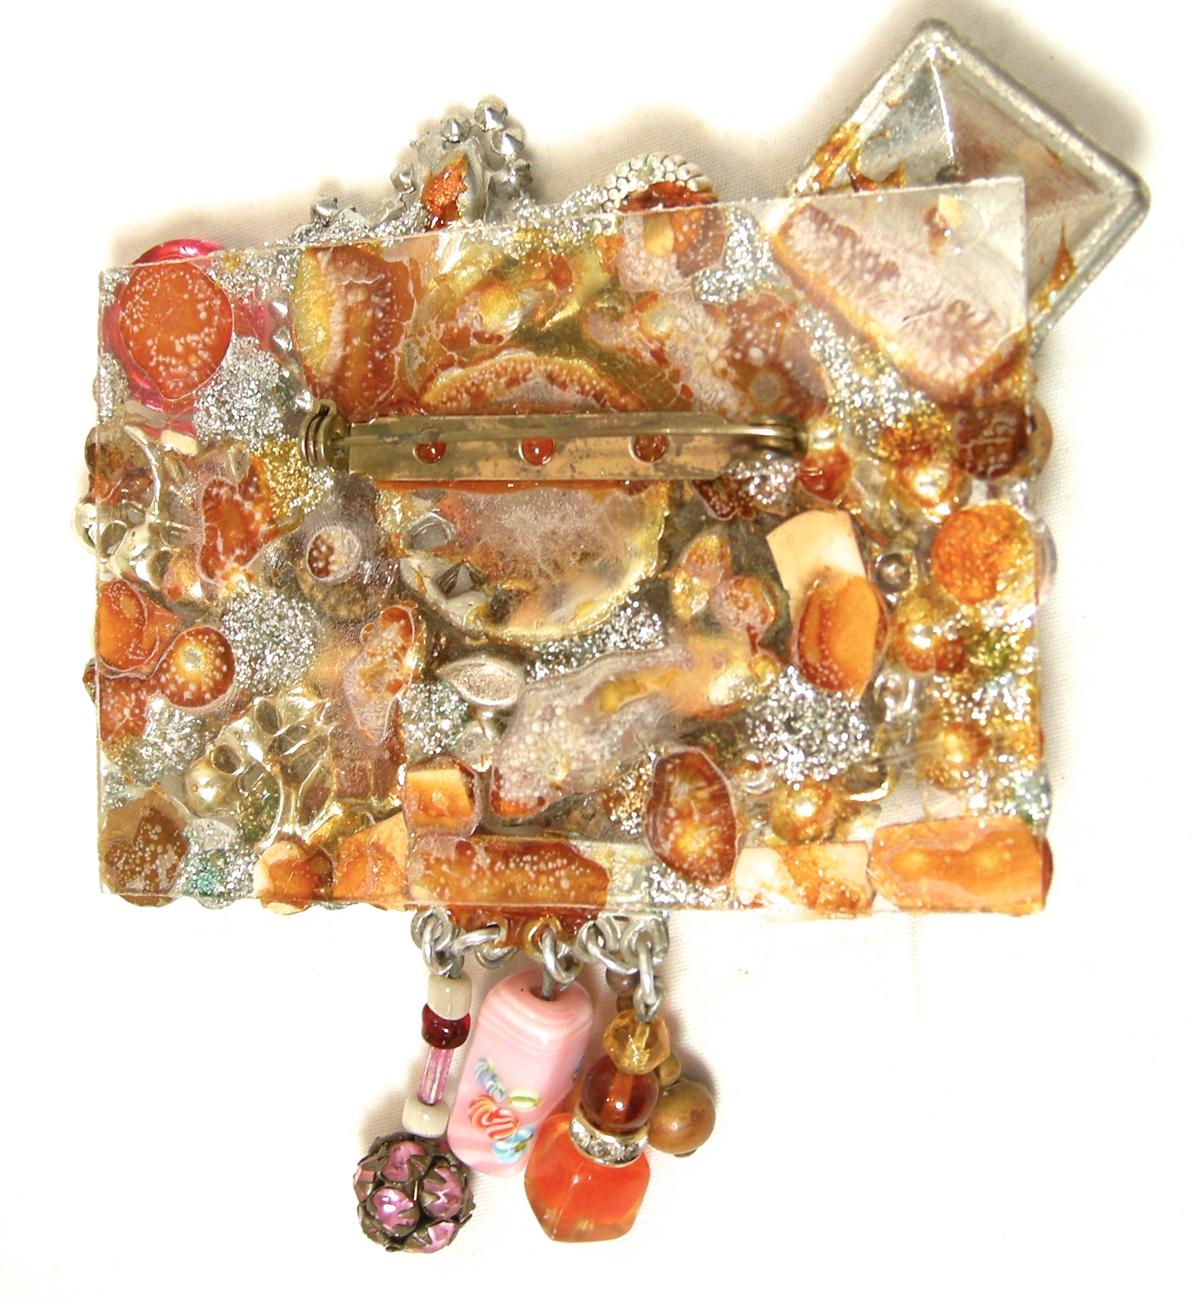 This large, fun vintage brooch is quite impressive and obviously hand crafted with multi-color crystals and beads on a clear Lucite backing. It has a turn-pin clasp.  In excellent condition, this brooch measures 3-1/2” x 3-3/4”.